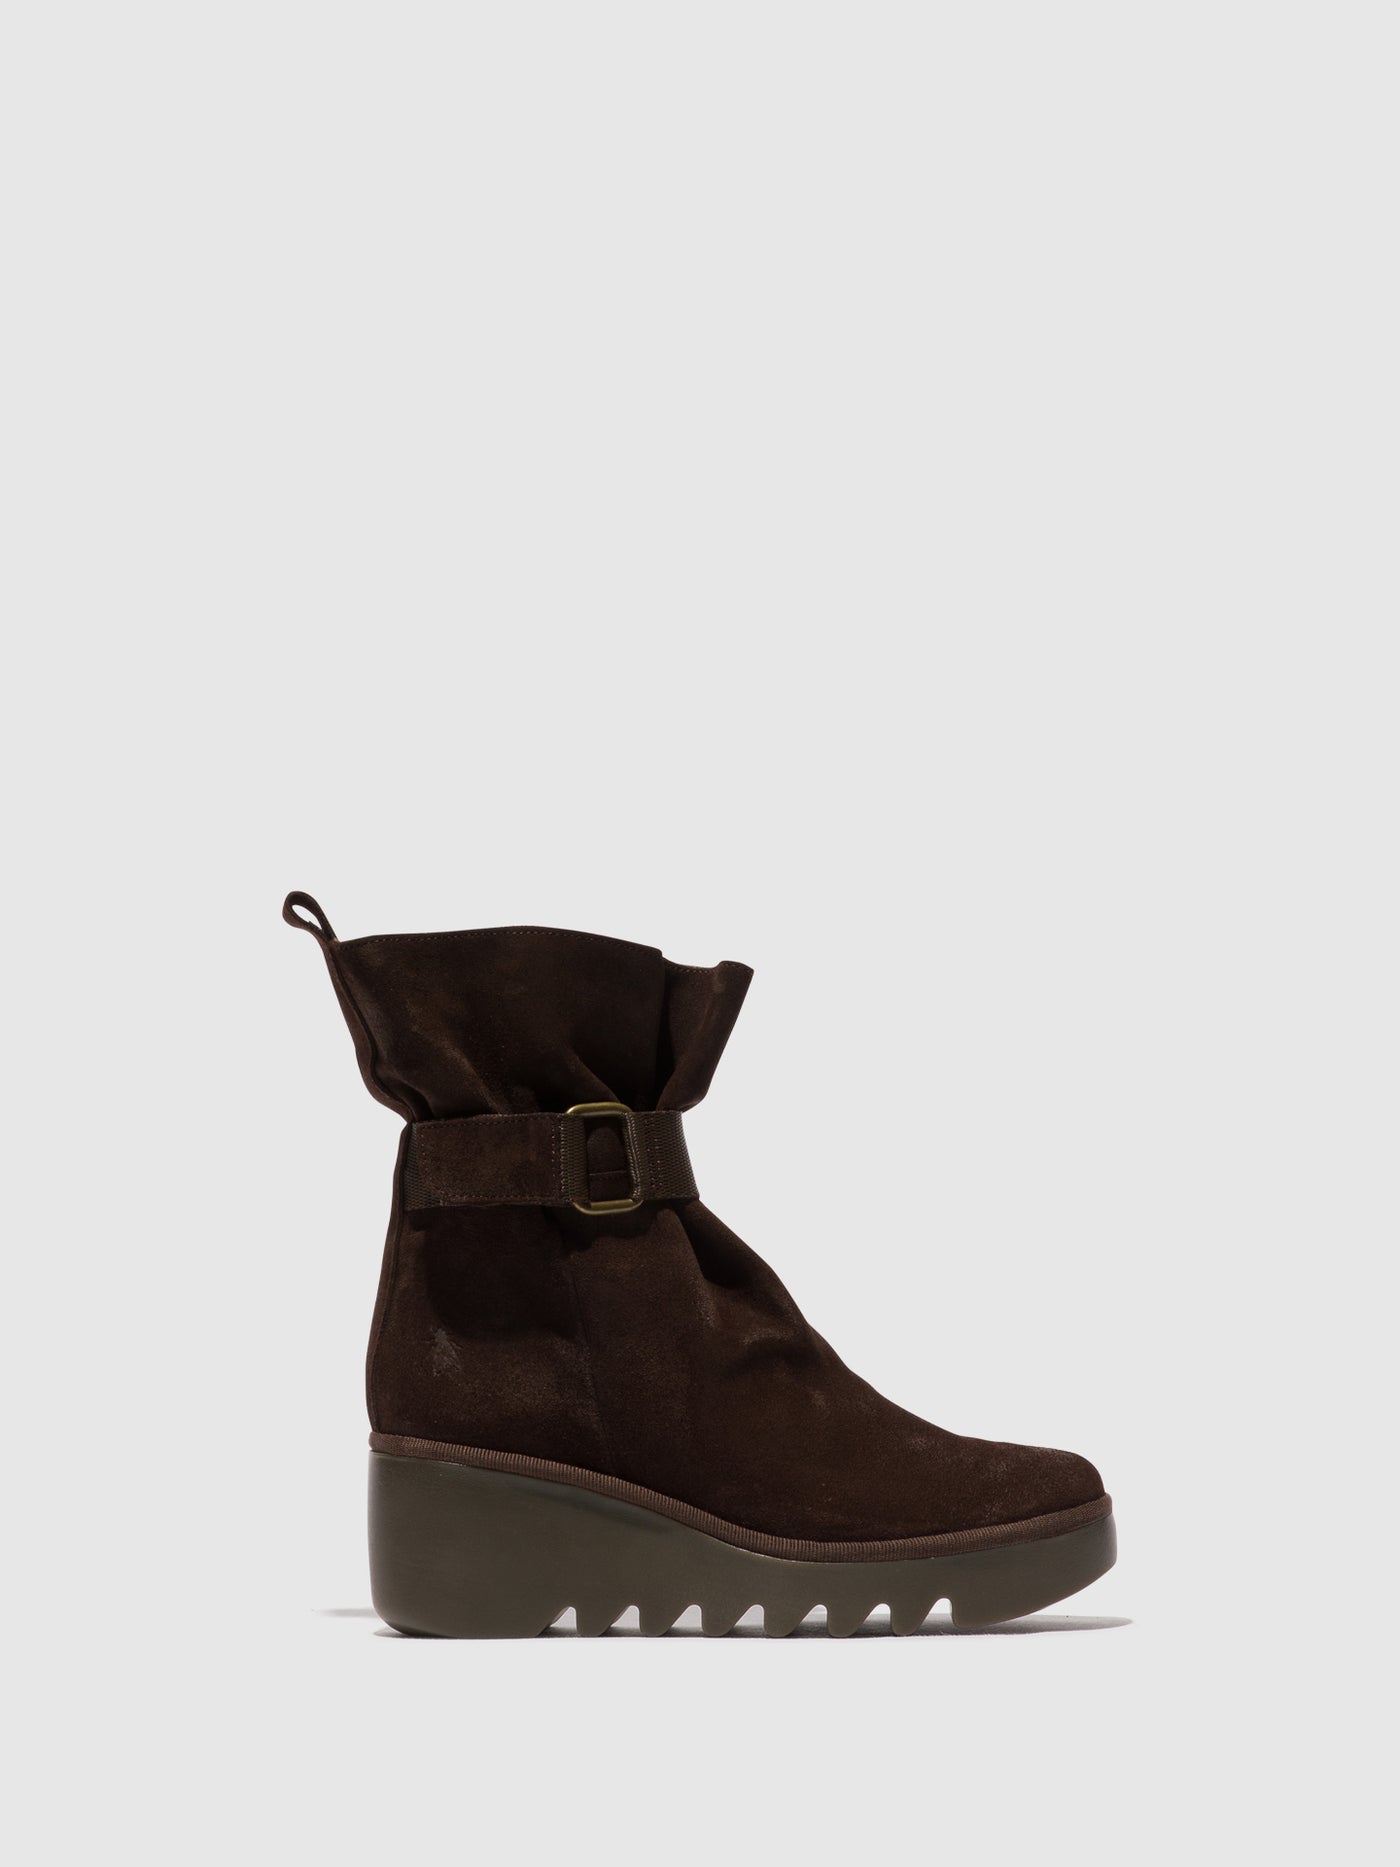 Buckle Ankle Boots BLIT453FLY EXPRESSO